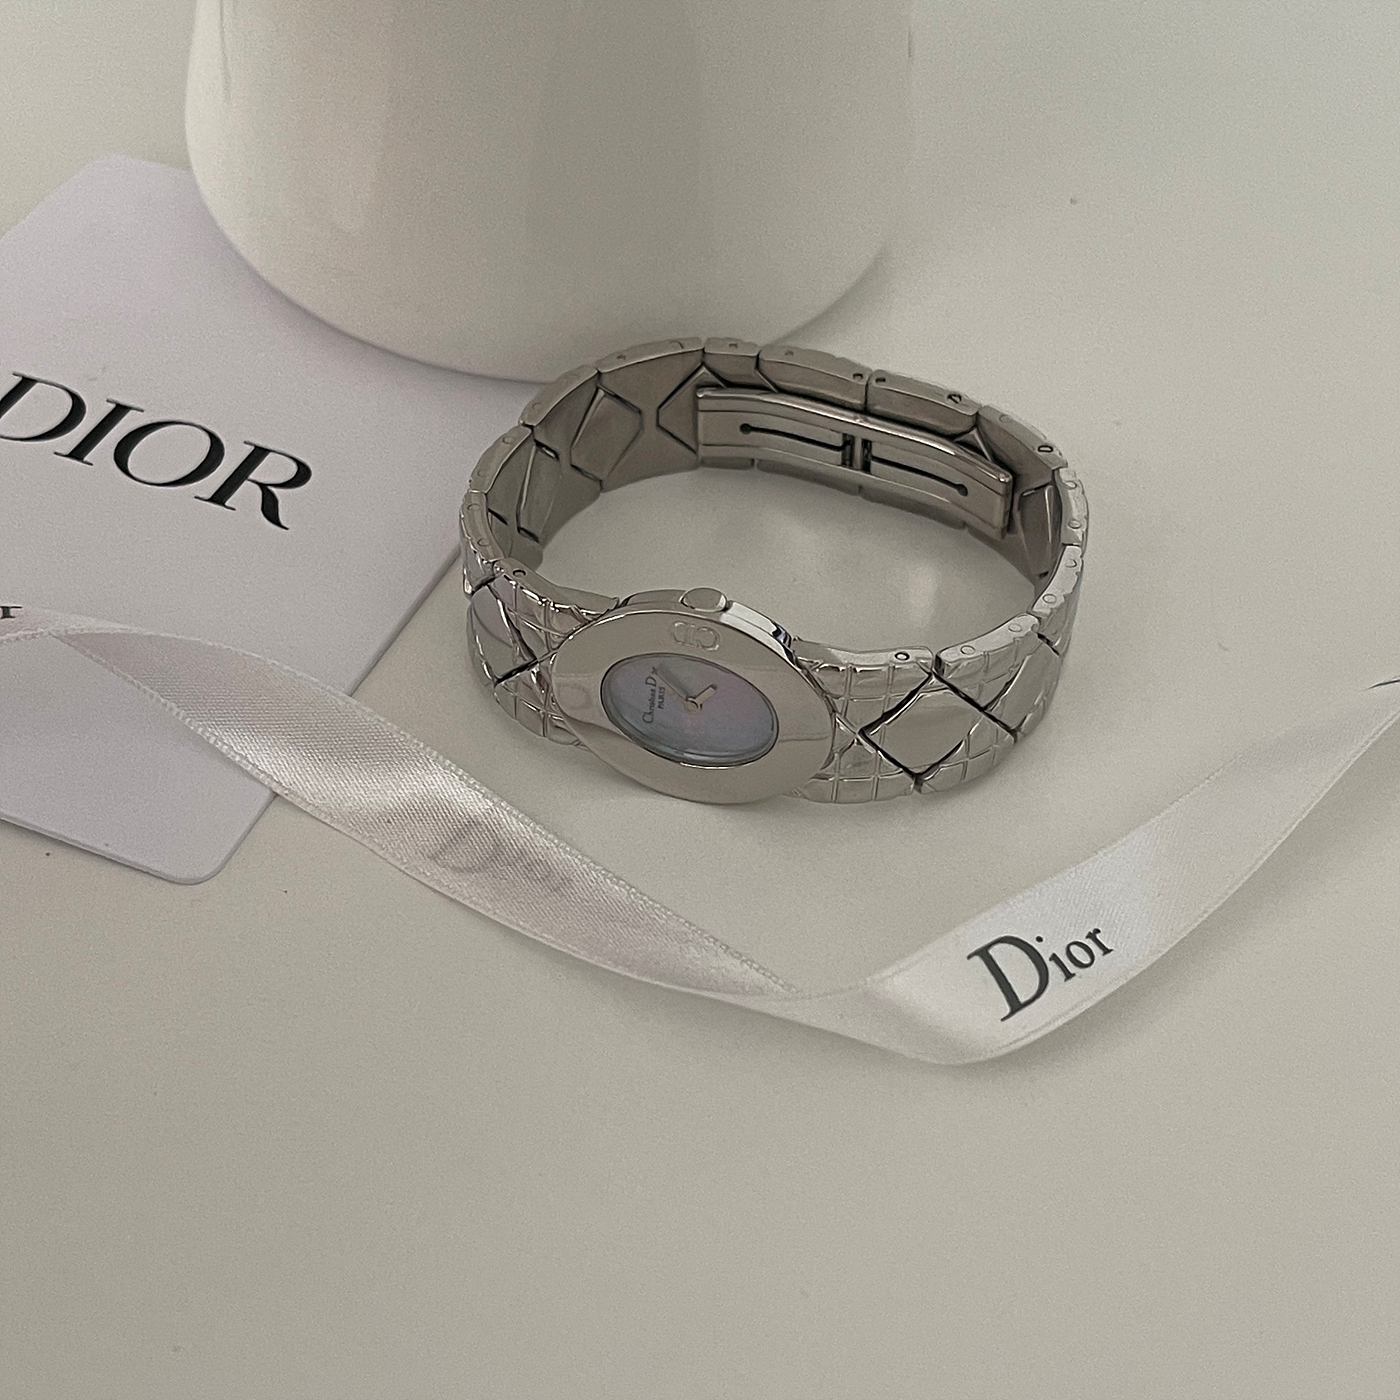 CHRISTIAN DIOR lady dior blue shell dial oval watch